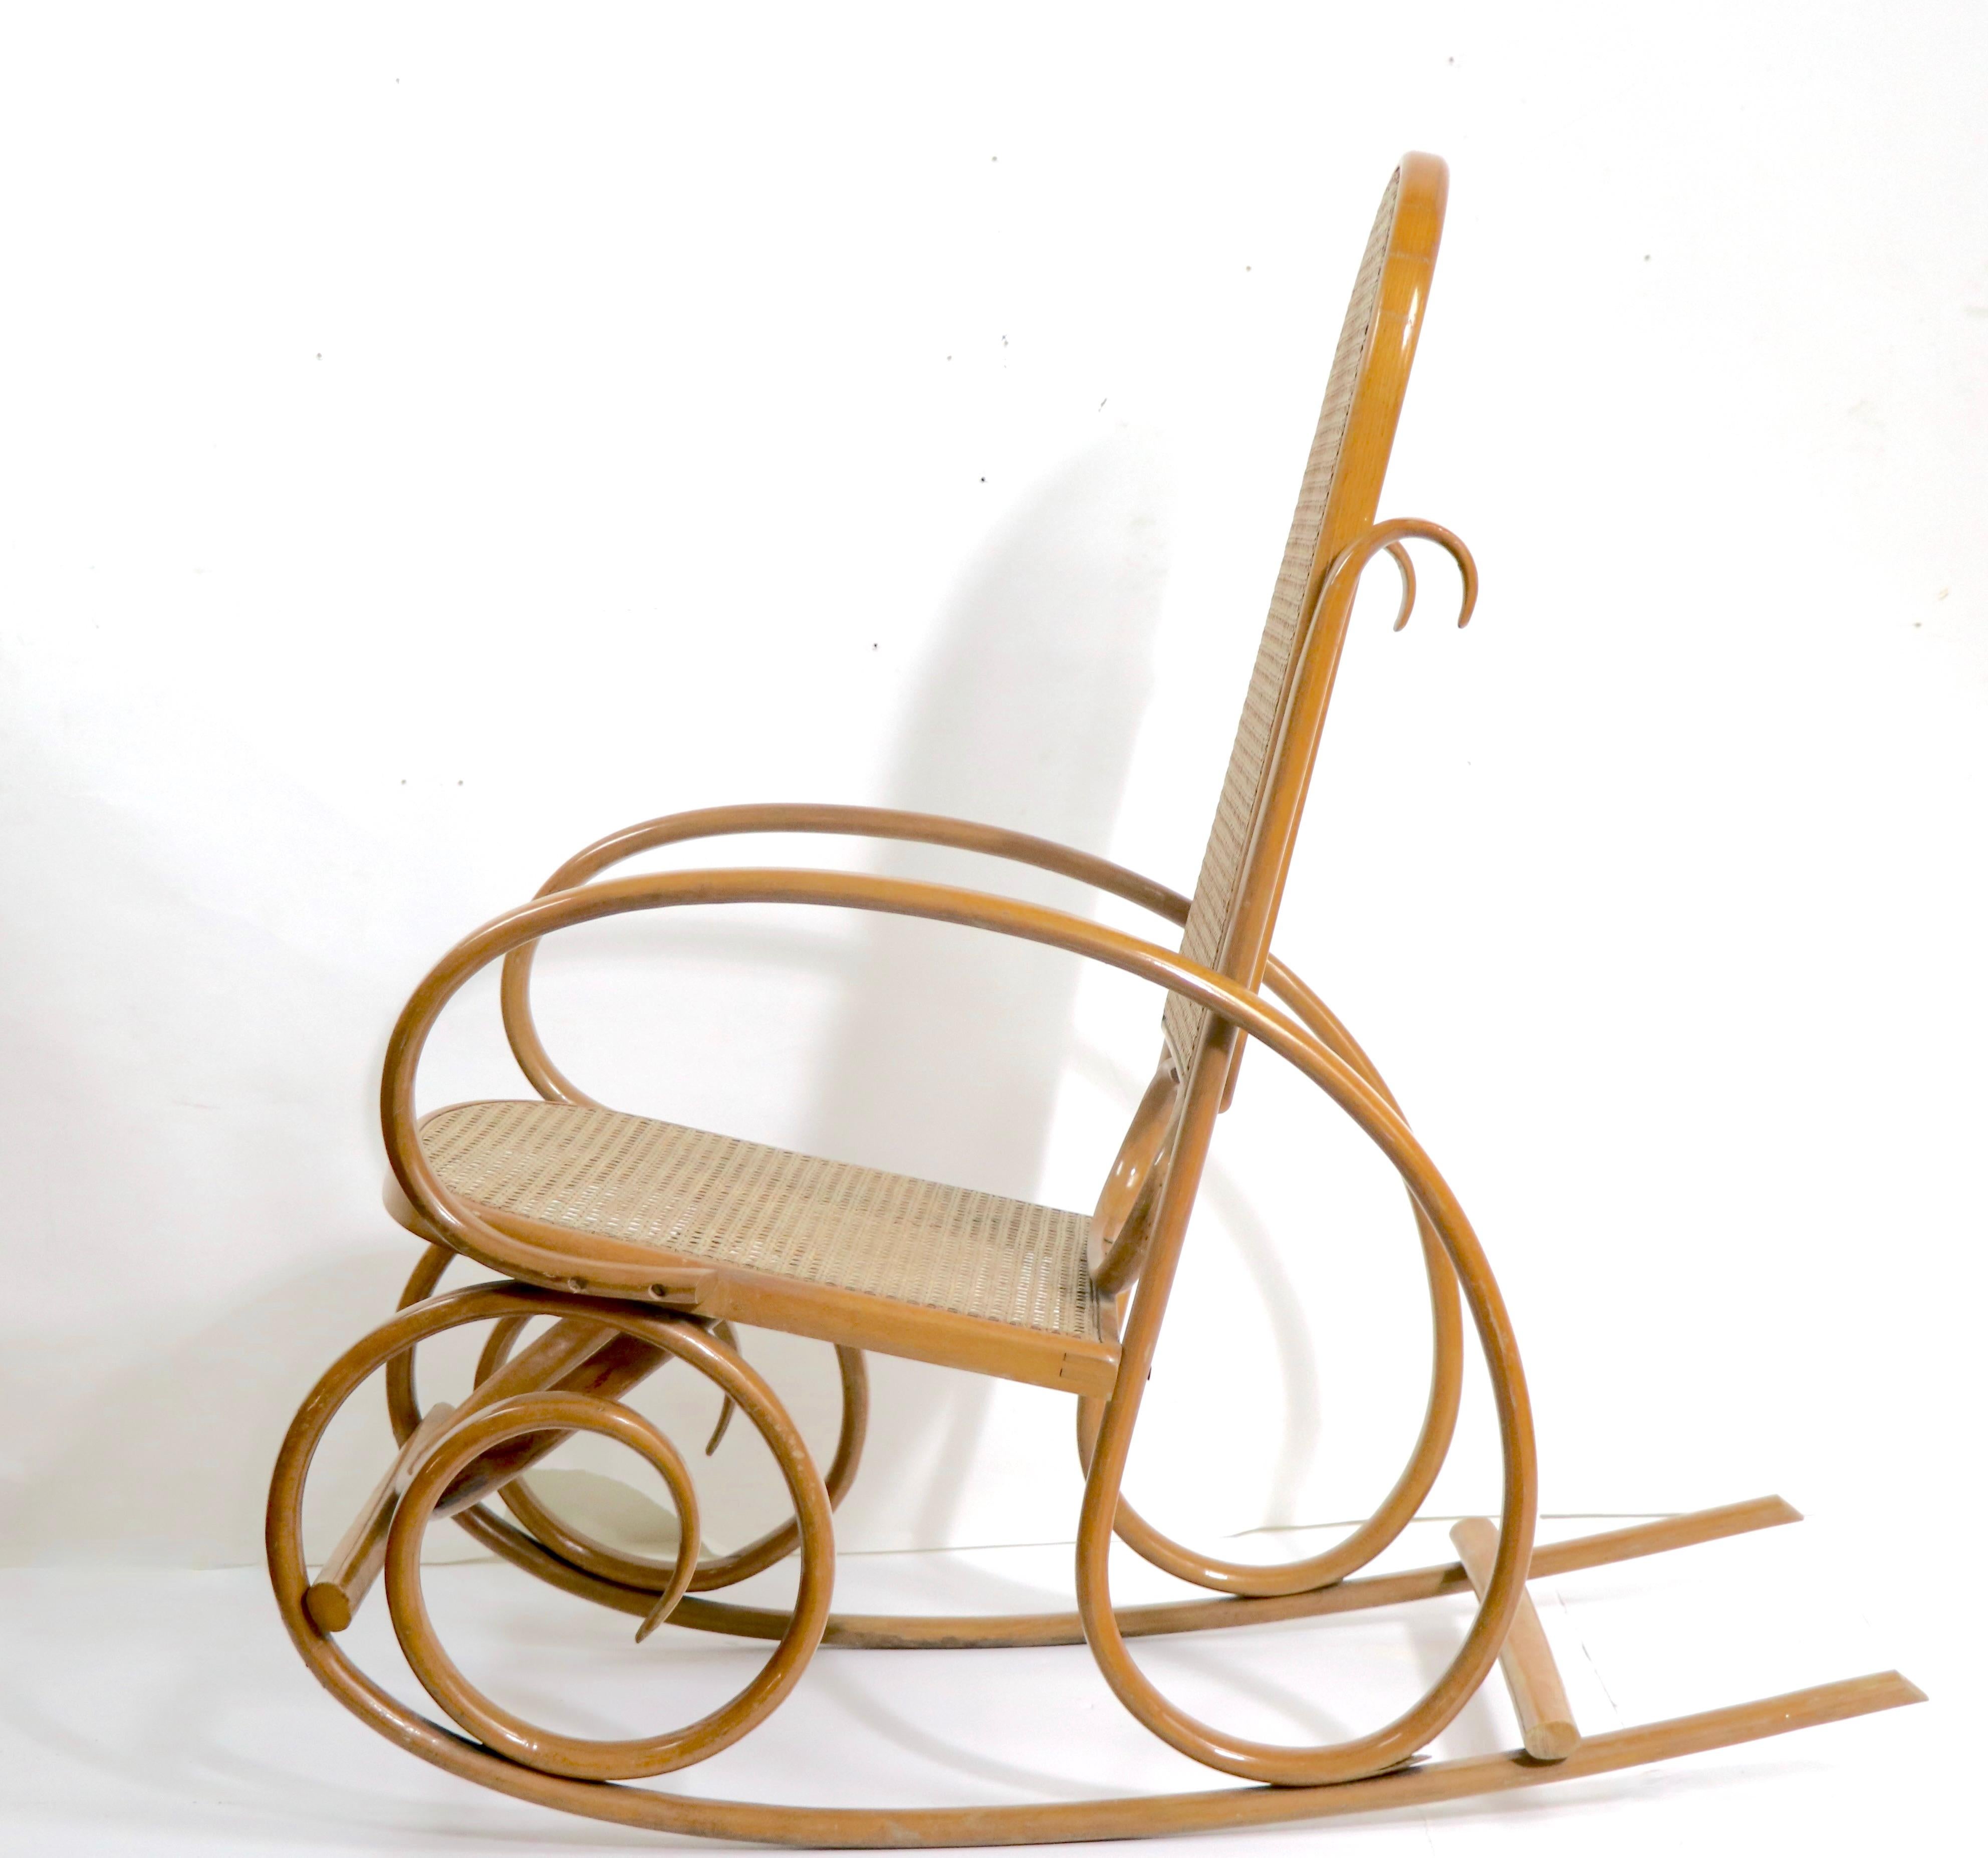 Unusual bentwood and cane rocking chair, in the Vienna Secessionist style, probably mid 20th C vintage, Thonet - made in USA, unsigned. The chair is slightly smaller in scale, a variation of the more common version often seen on the market. This